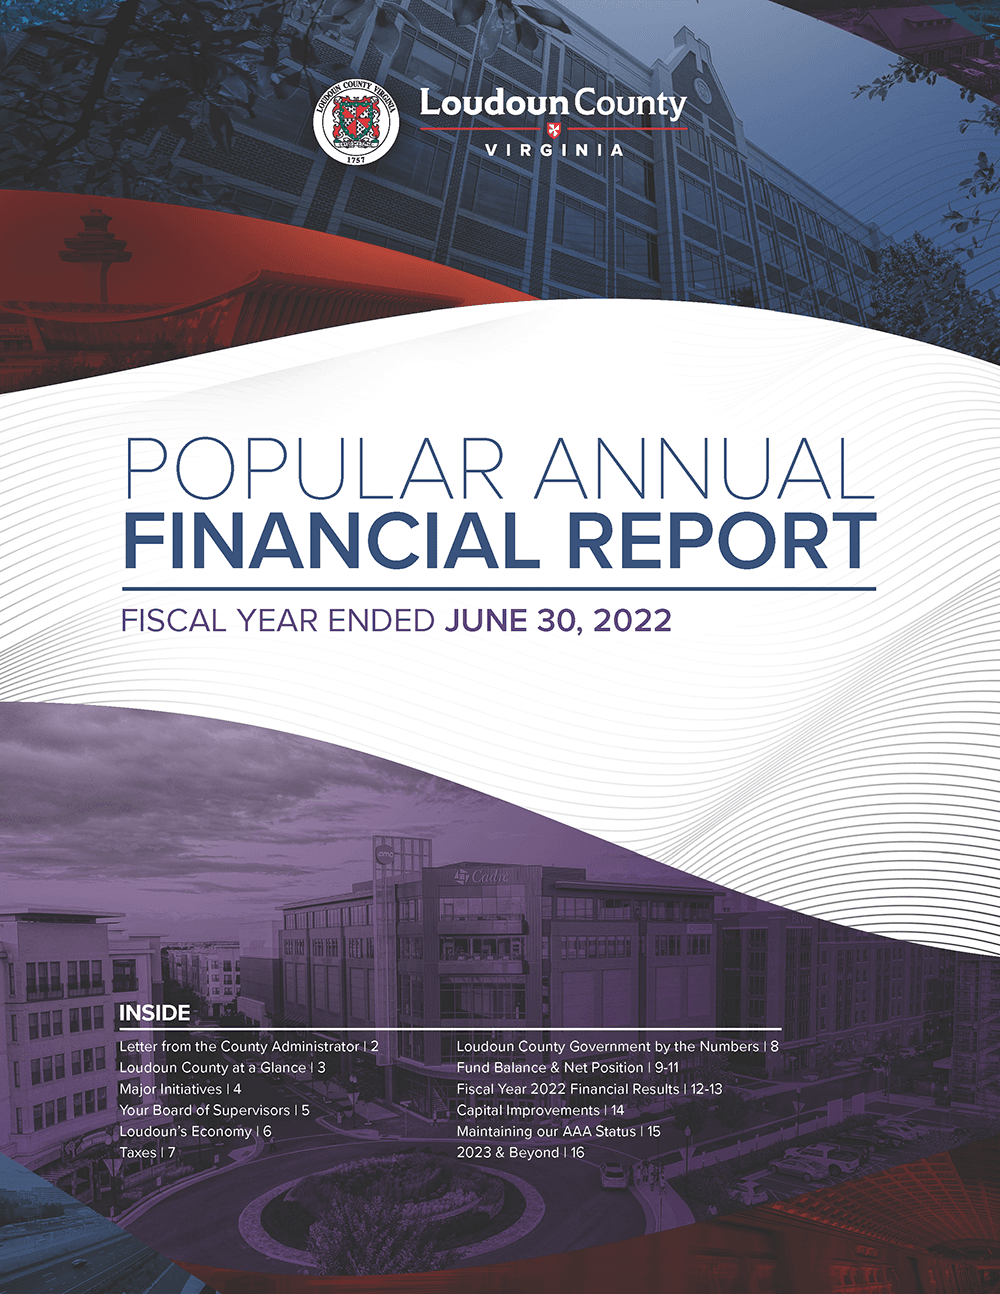 Link to Loudoun County Popular Annual Financial Report